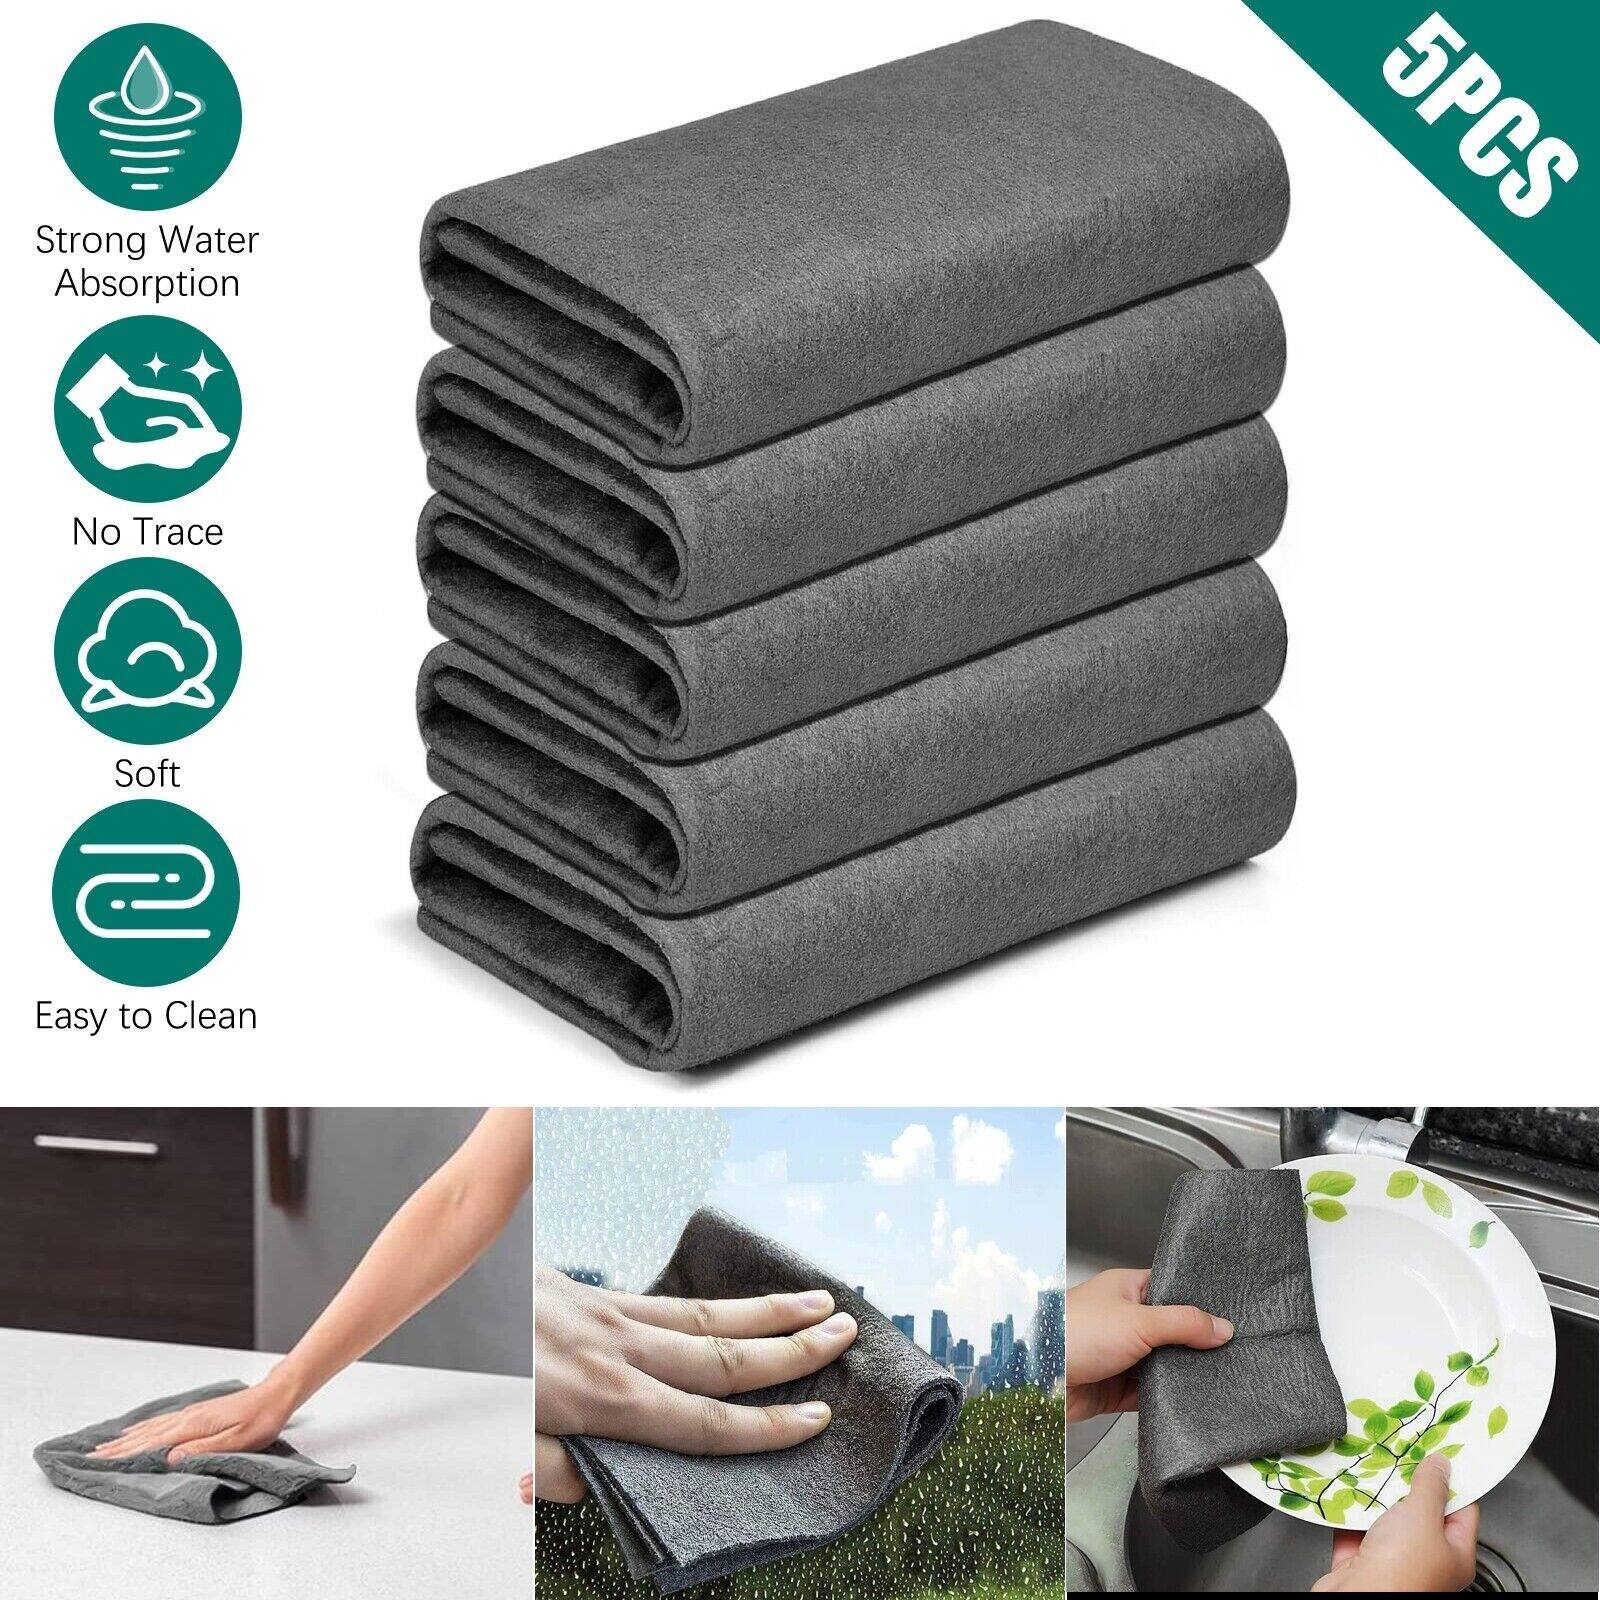 5X Thickened Microfiber Cleaning Cloth - Bed Bath & Beyond - 40237407